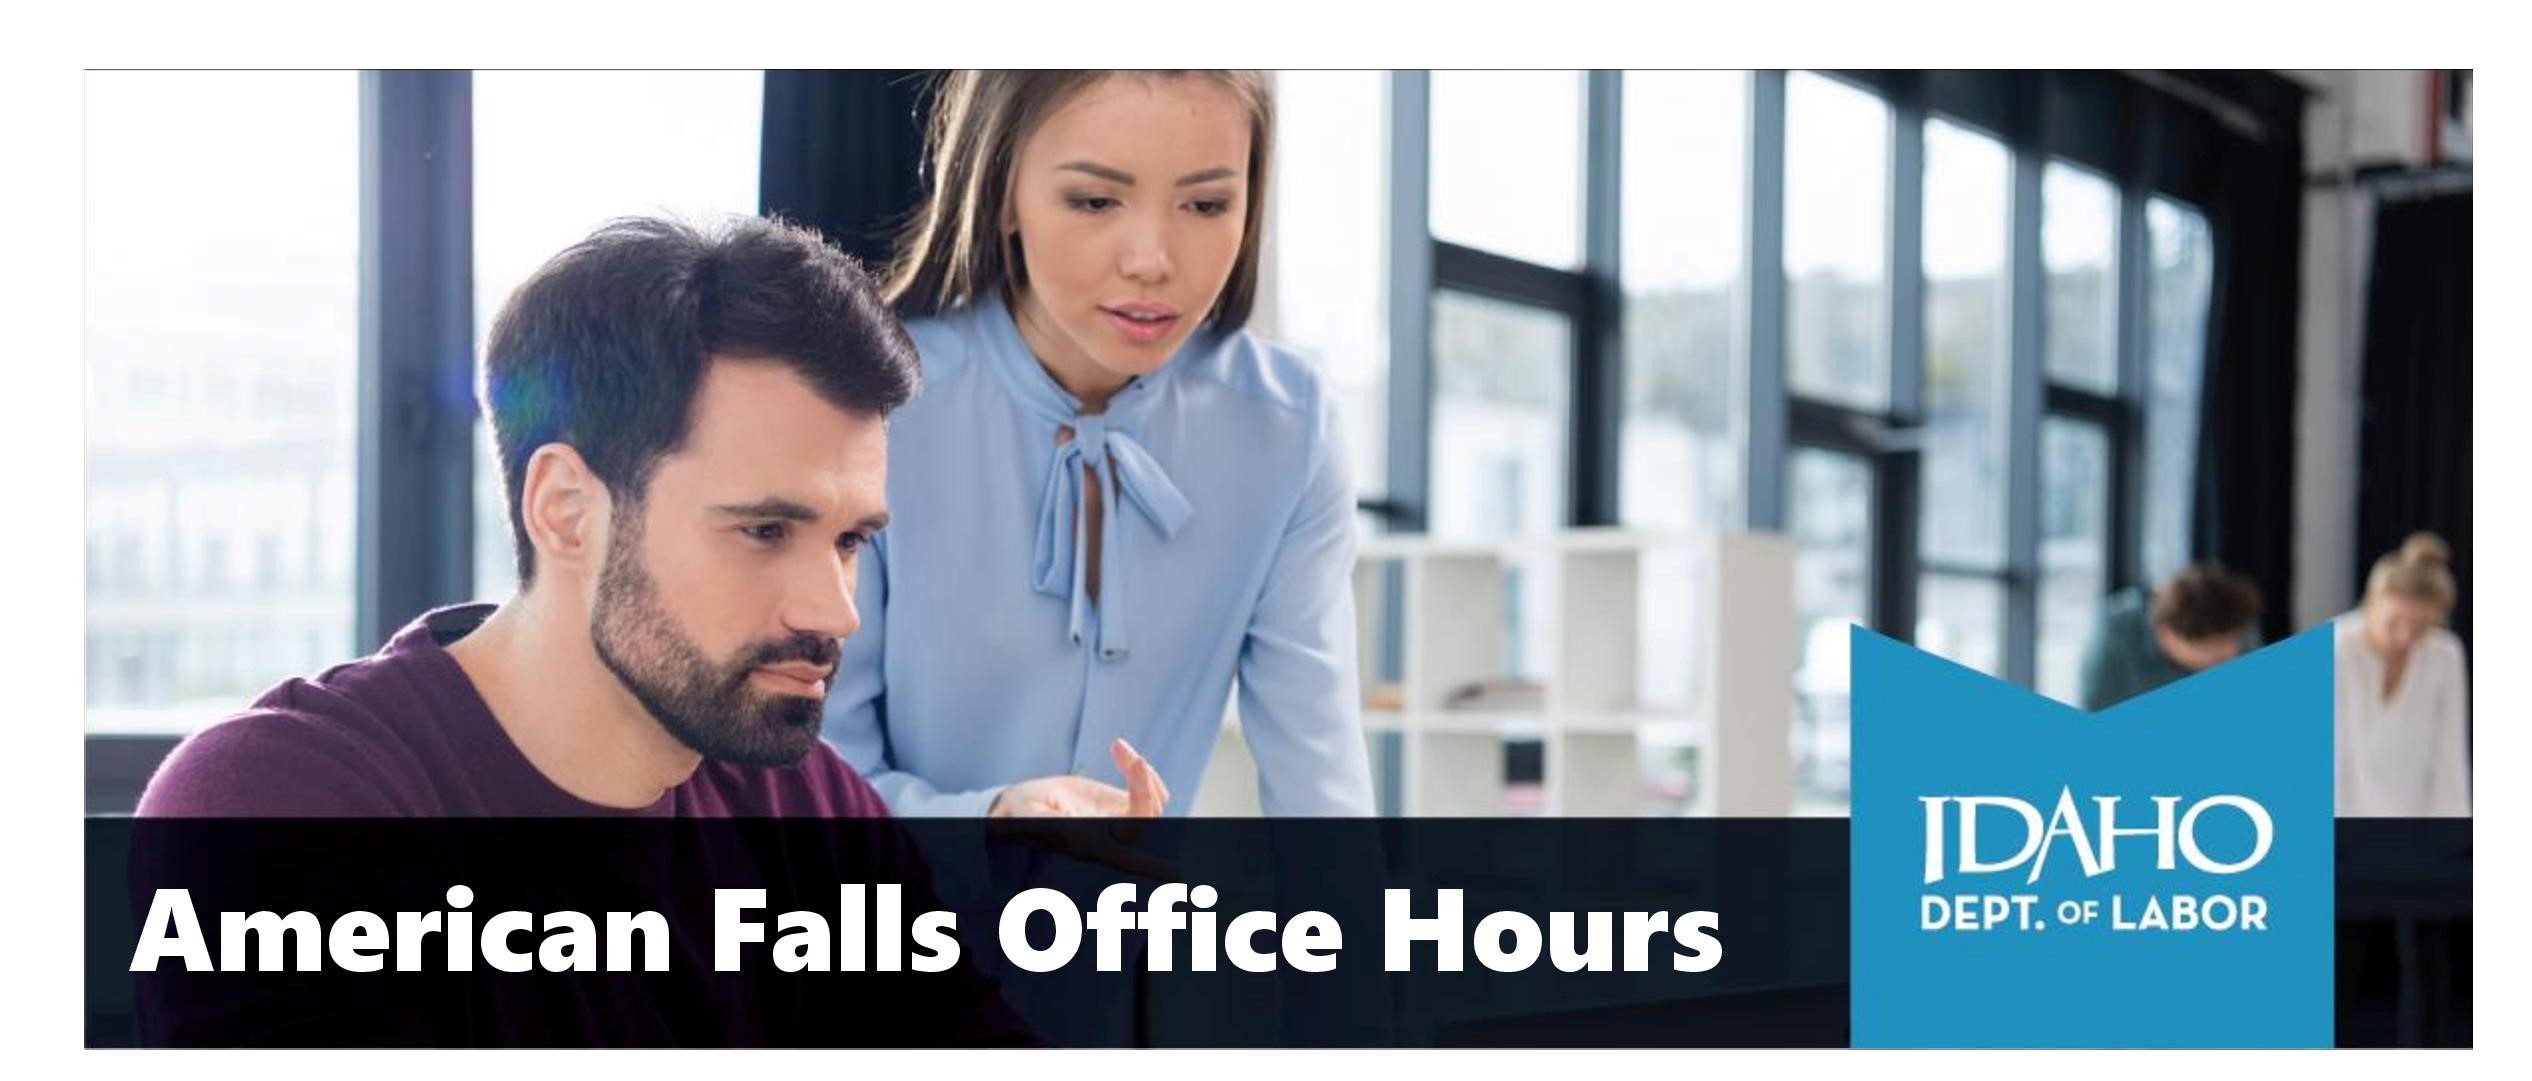 Idaho department of labor American falls office hours